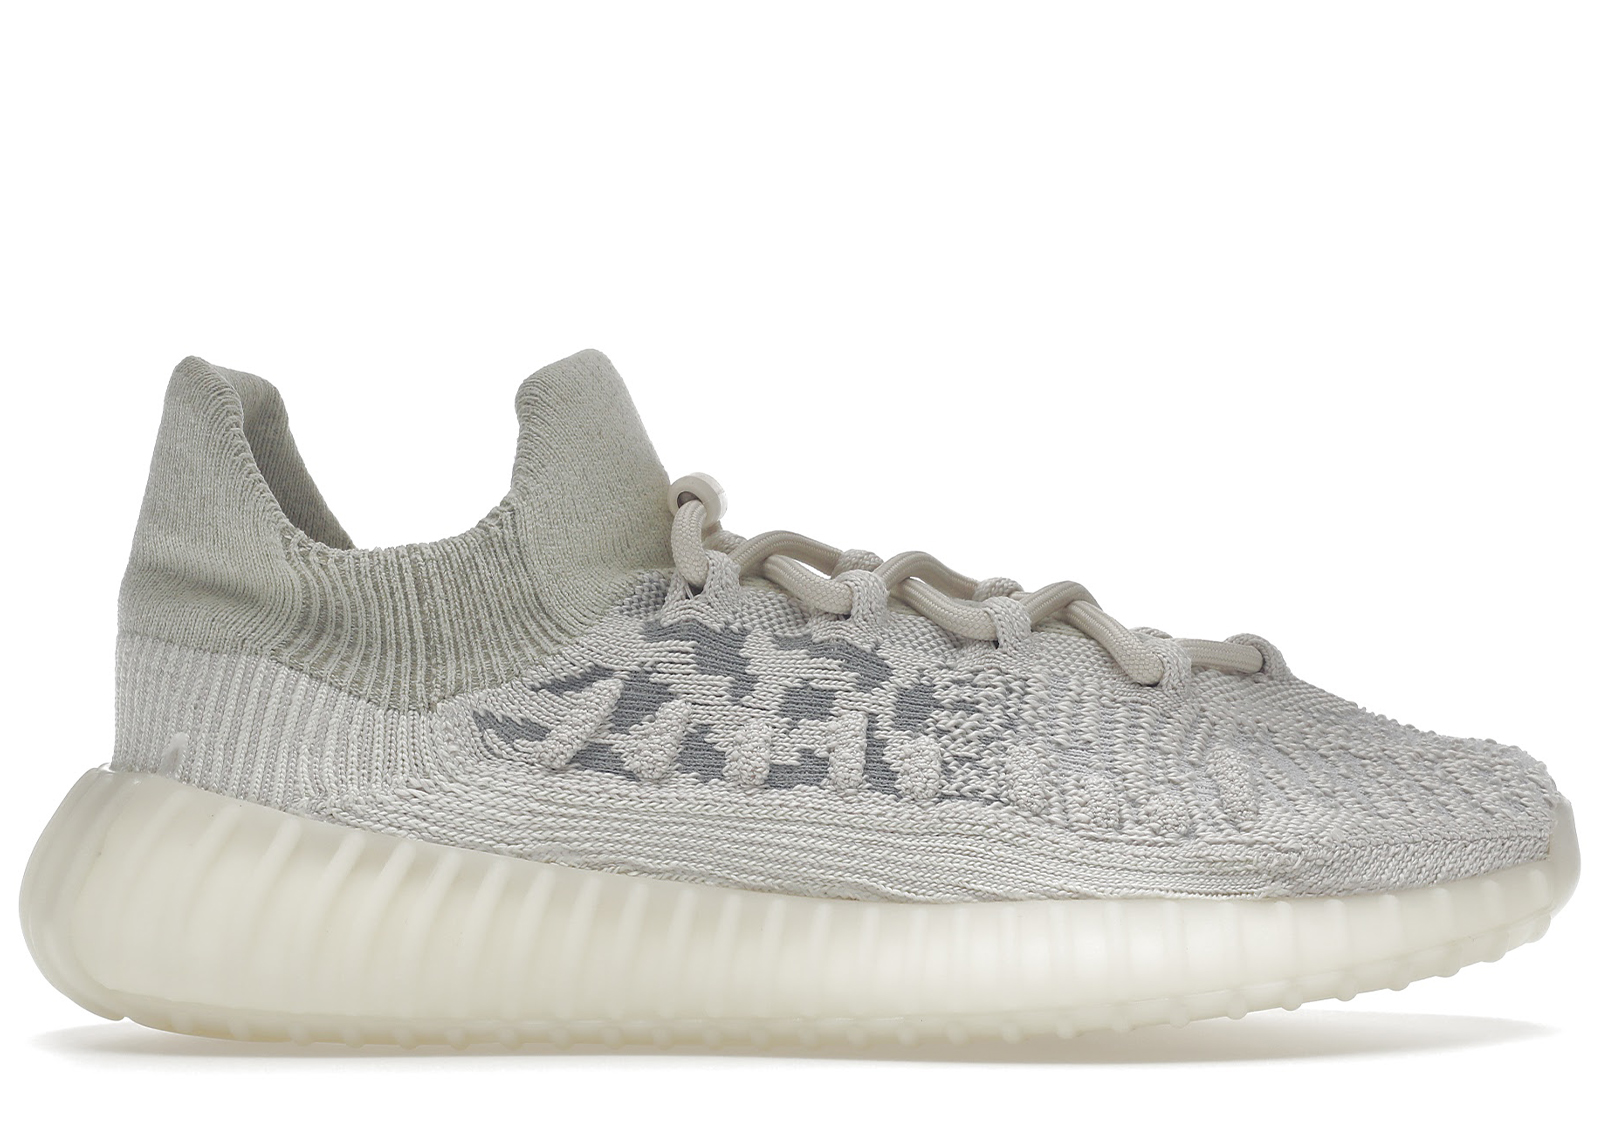 Buy adidas Yeezy Size 13 Shoes & New Sneakers - StockX